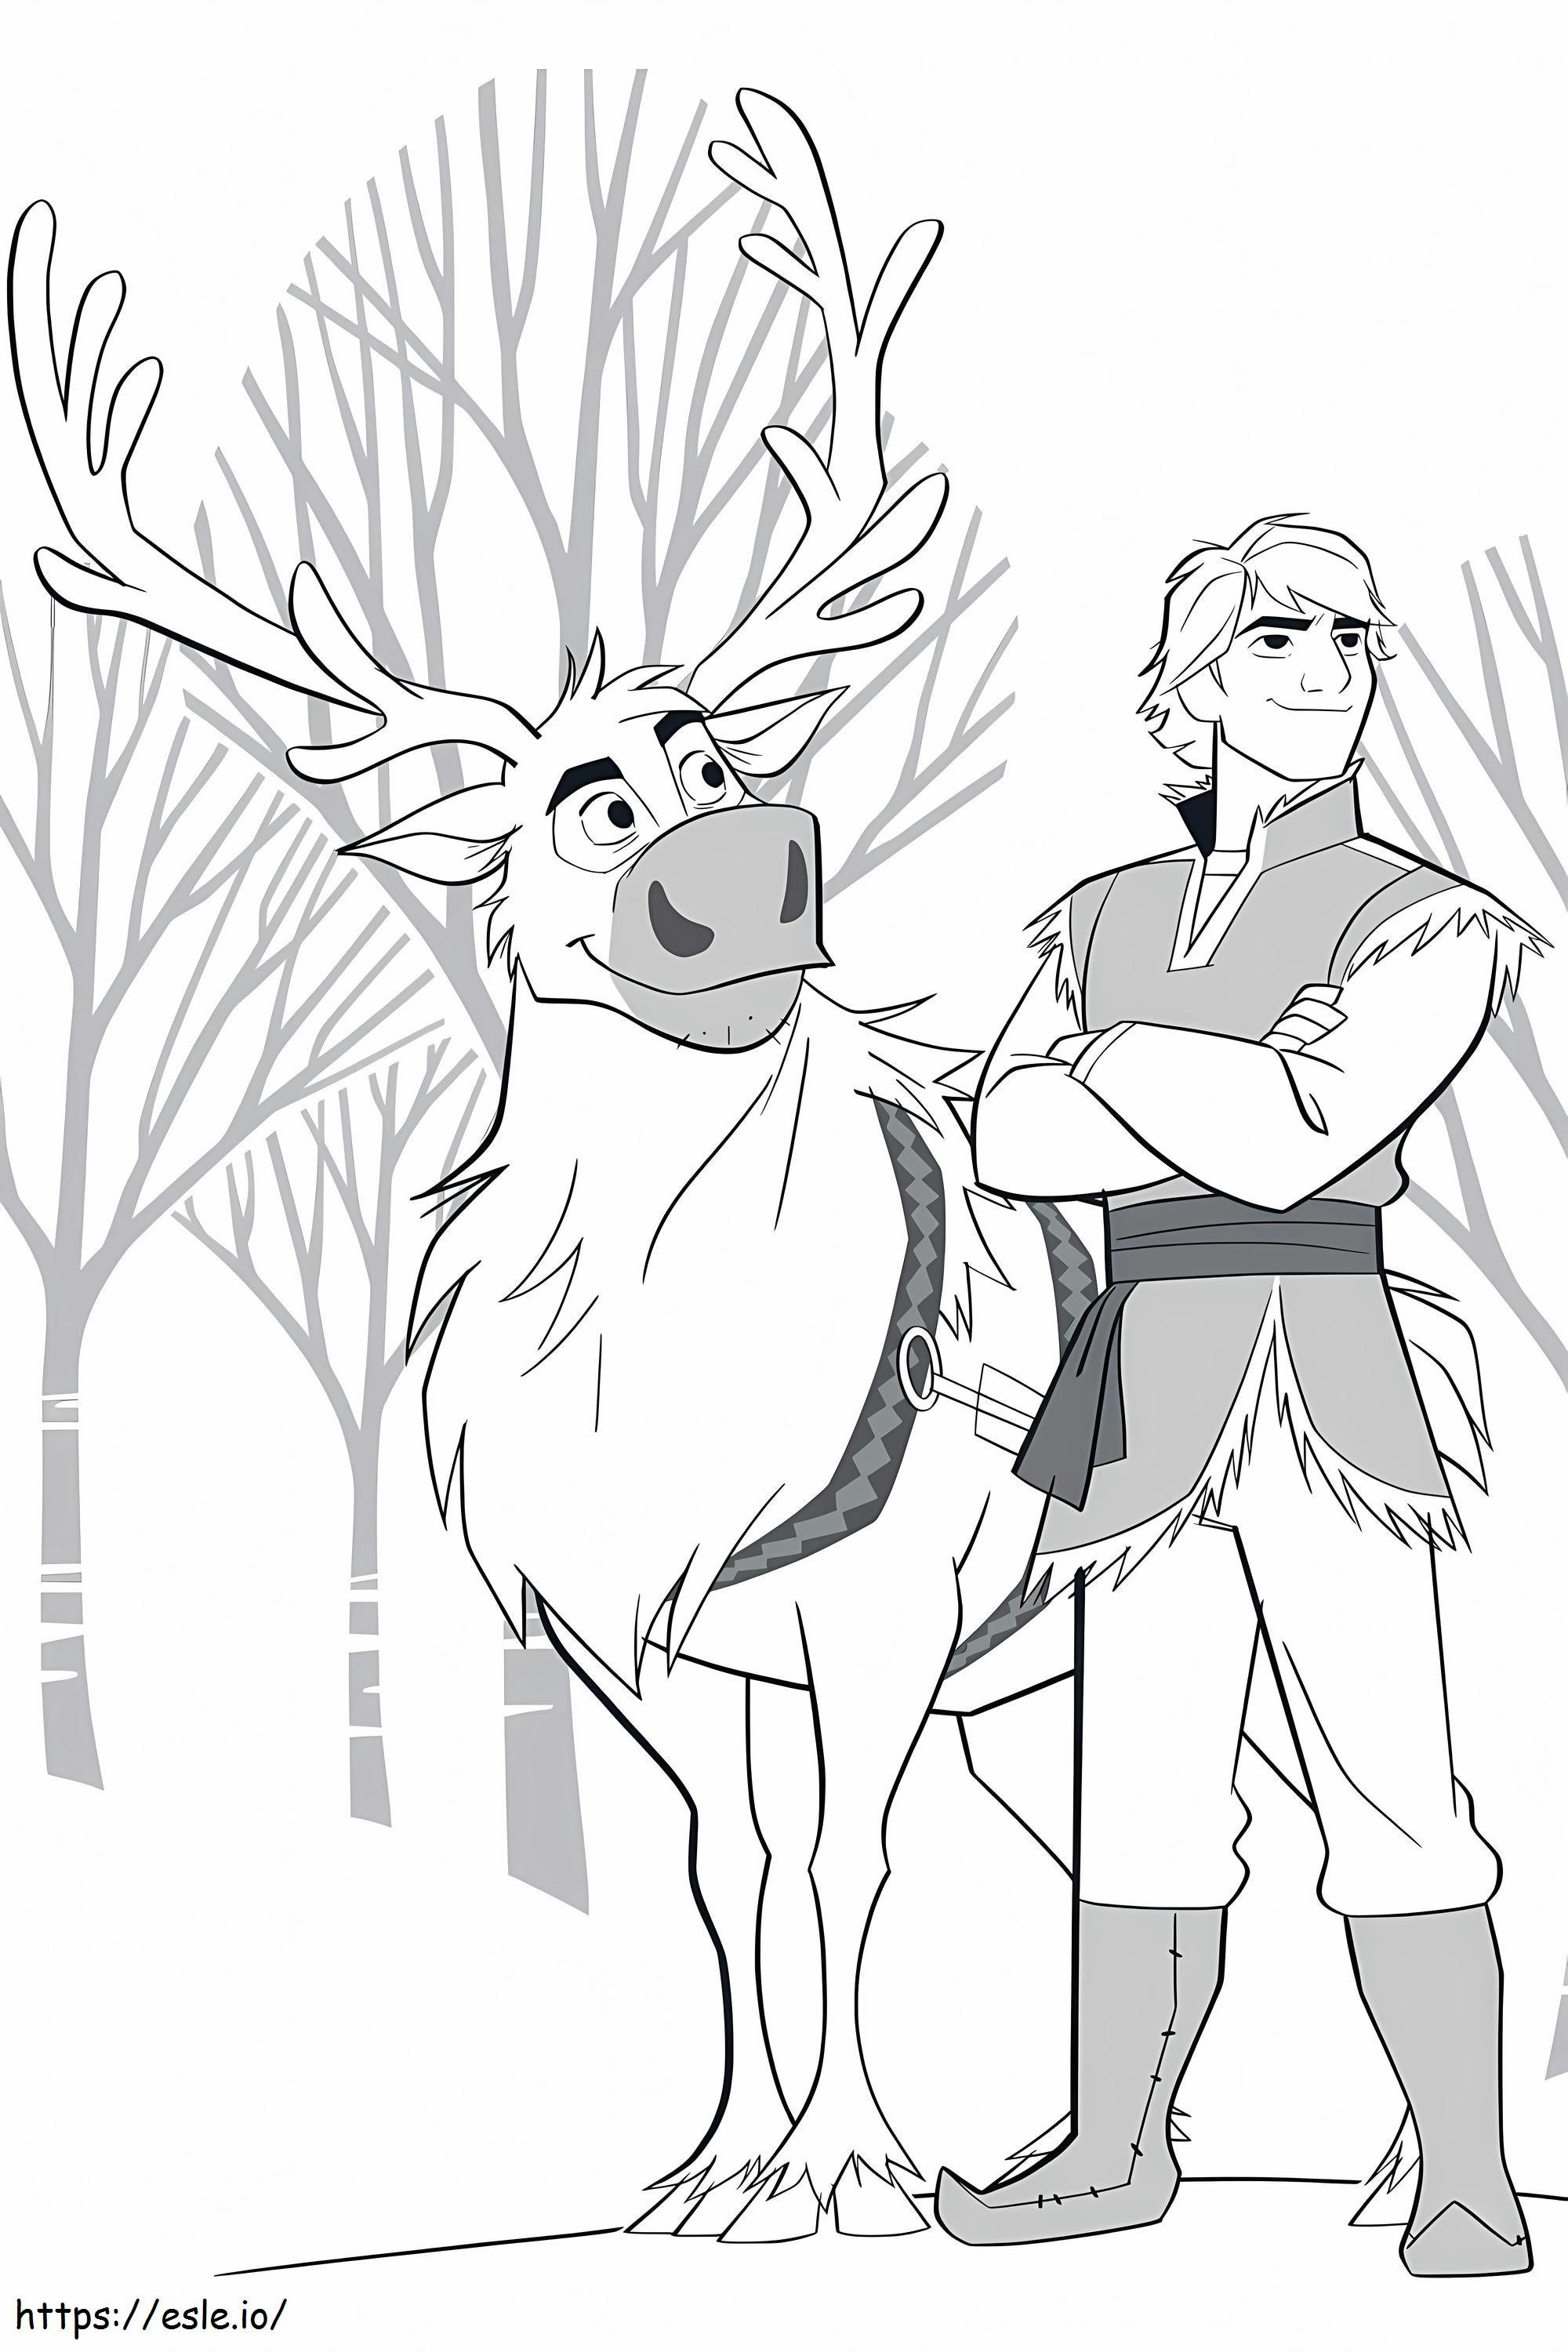 Frozen 2 Kristoff And Sven coloring page